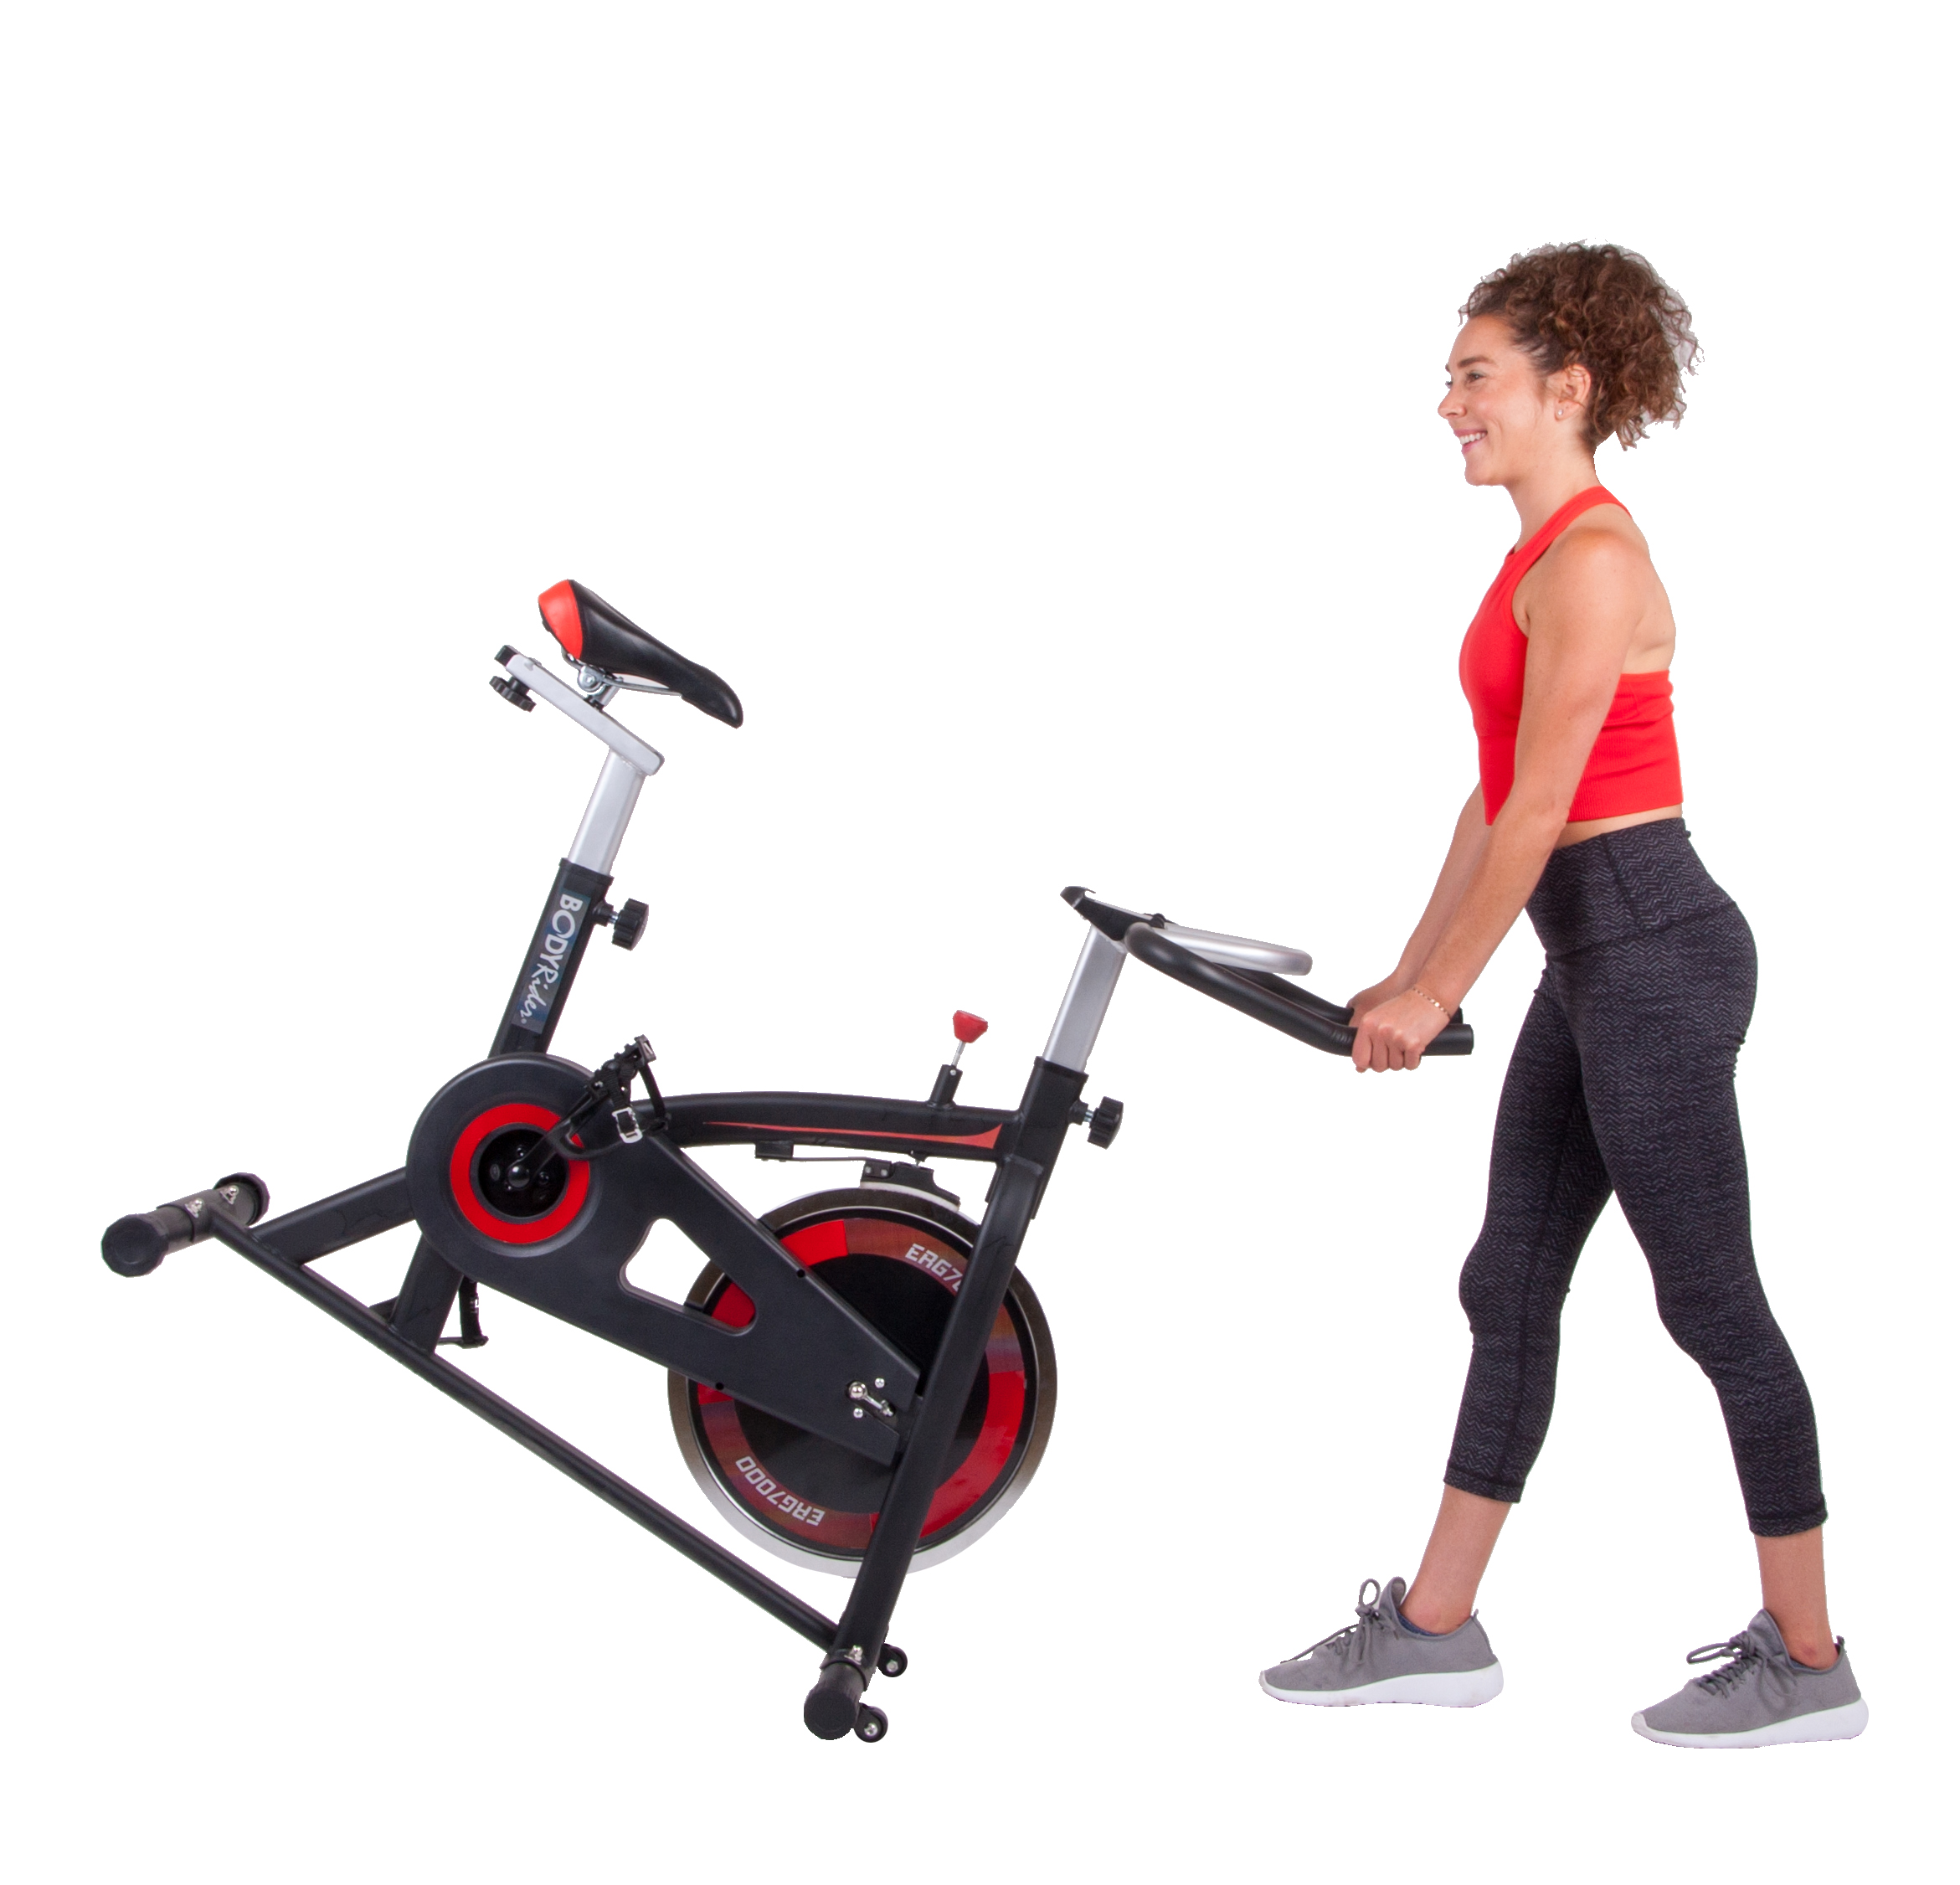 Body Rider ERG7000 PRO Cycling Trainer Stationary Bike, Max. Weight Capacity 250 Lbs. - image 5 of 7